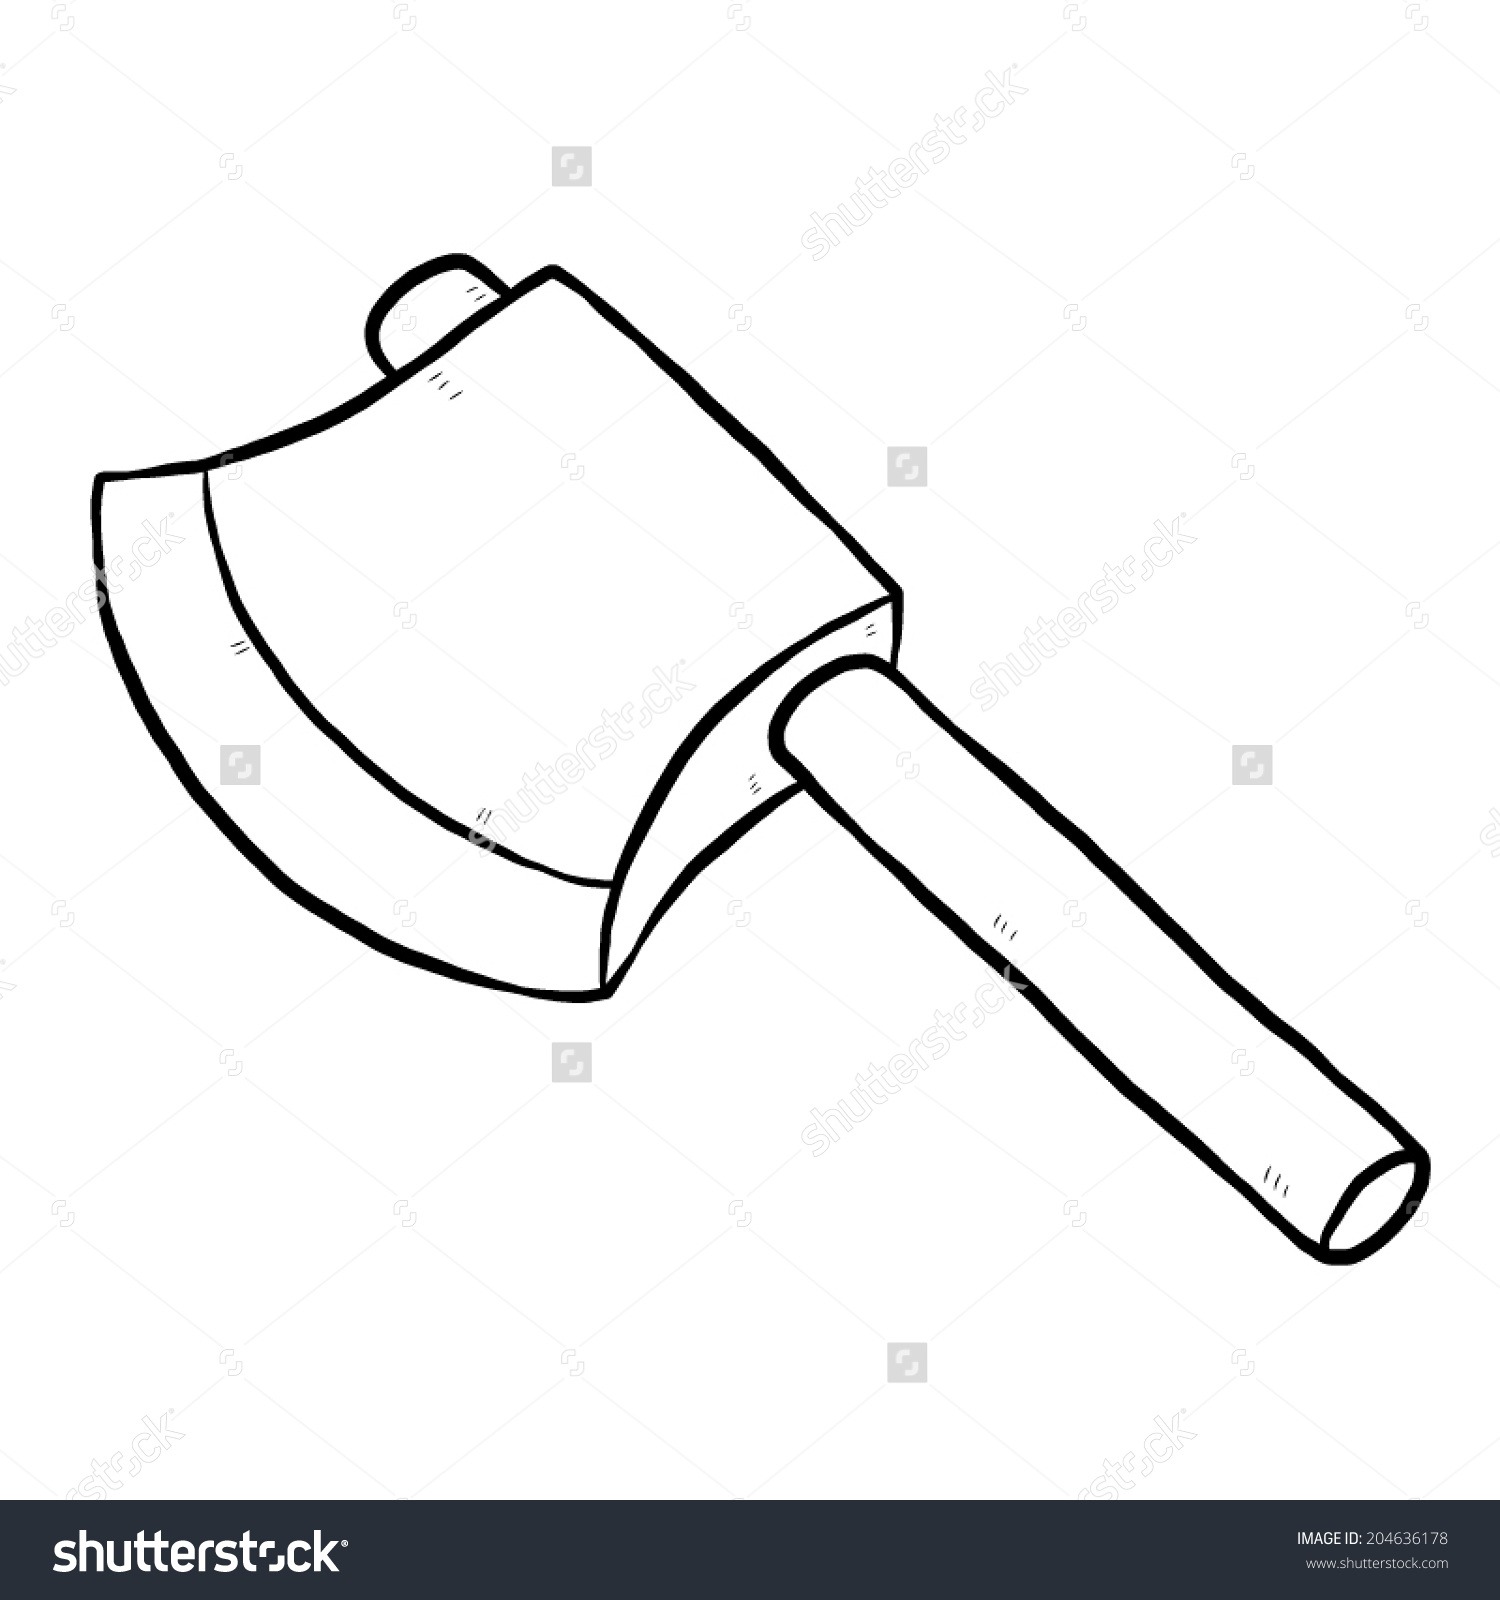 Axe letters format clip. Ax clipart black and white